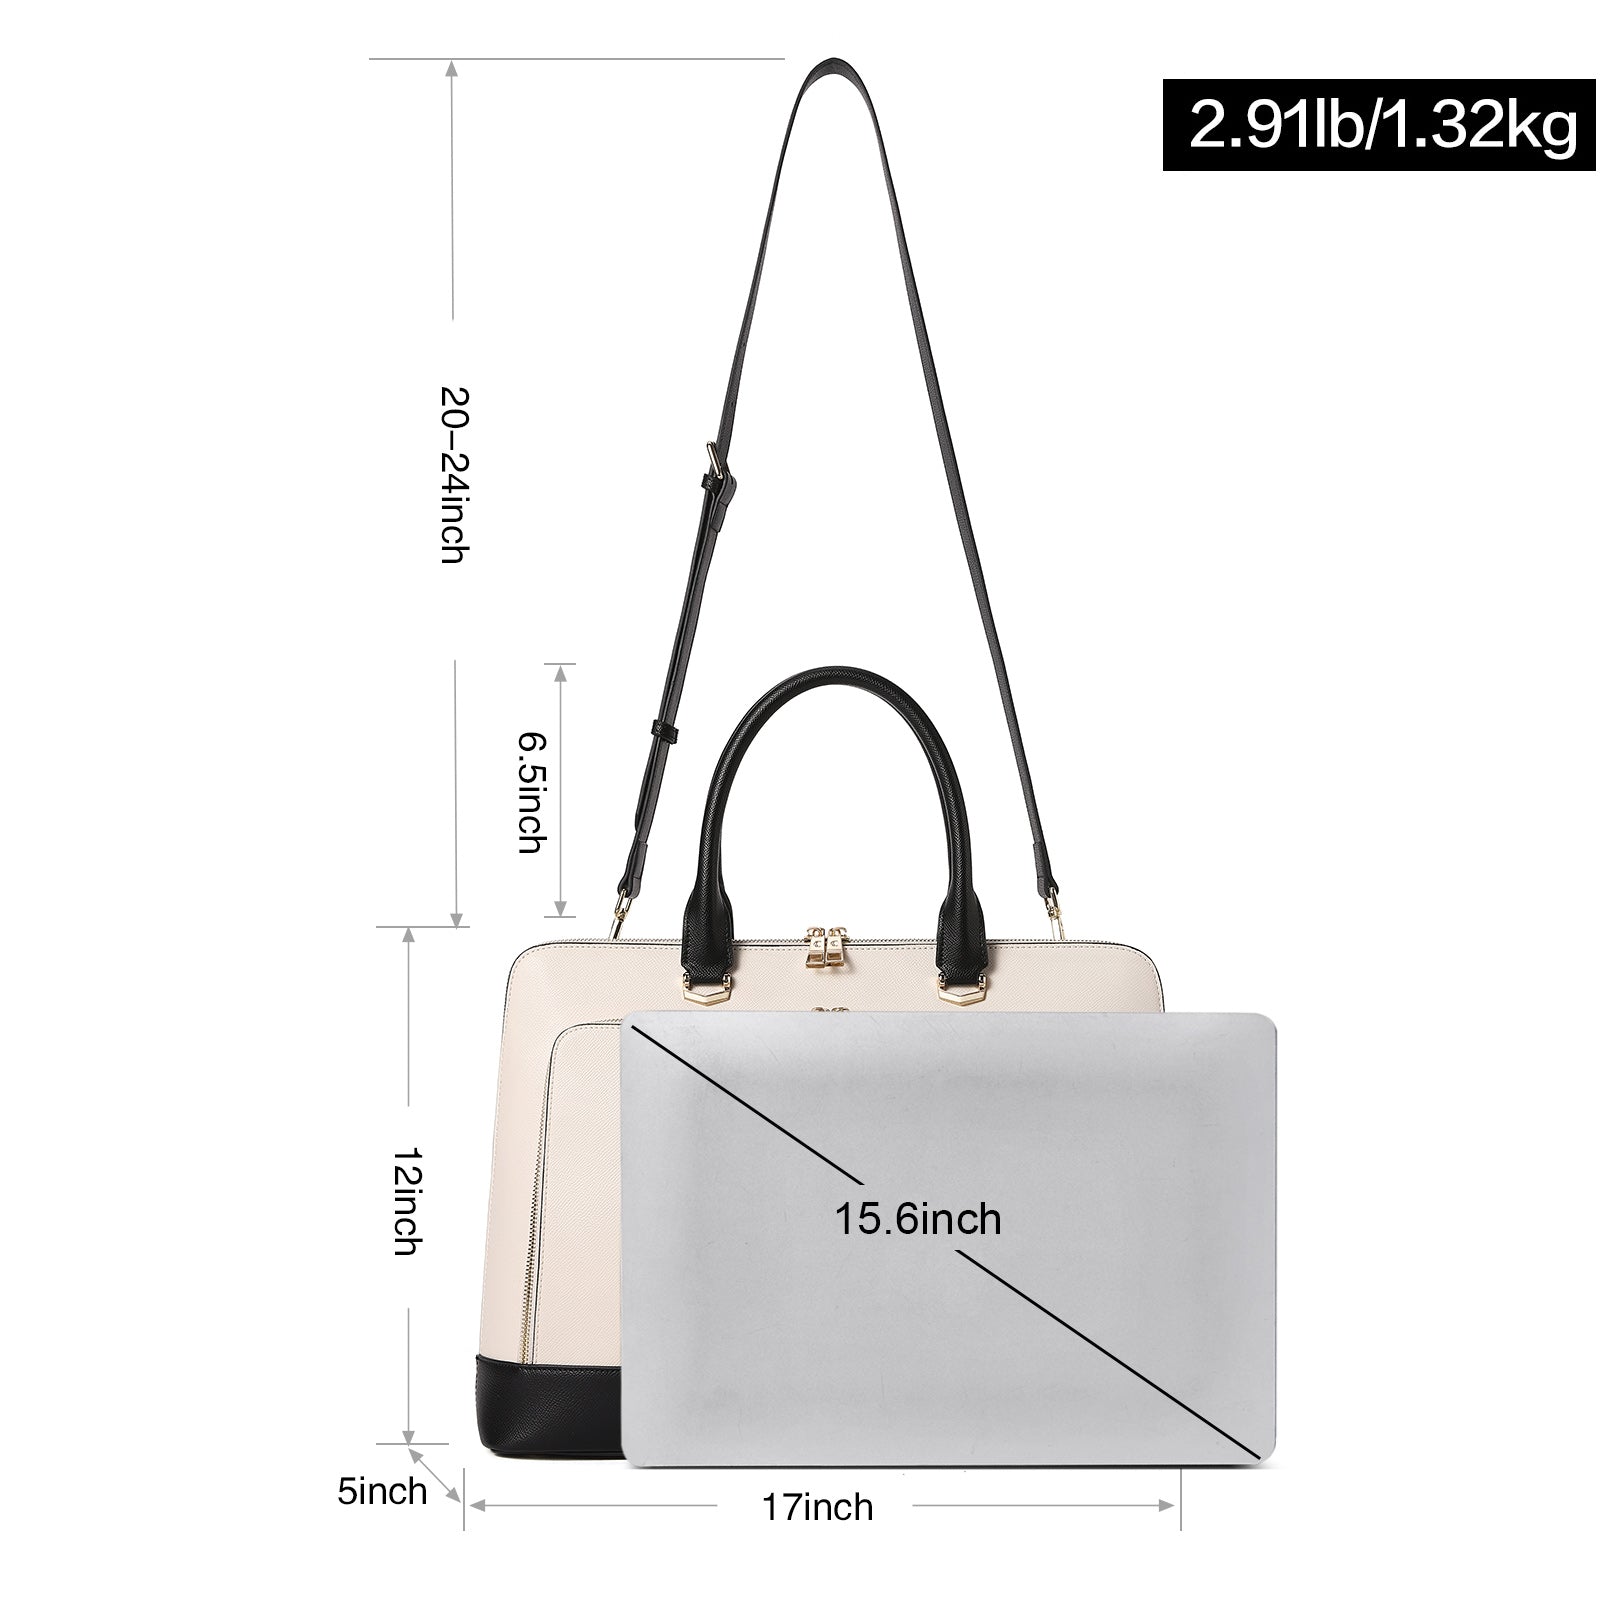 CLUCI Leather Briefcase for Women 15.6 Inch Laptop Business Computer Ladies Stylish Work Handbags Shoulder Bag